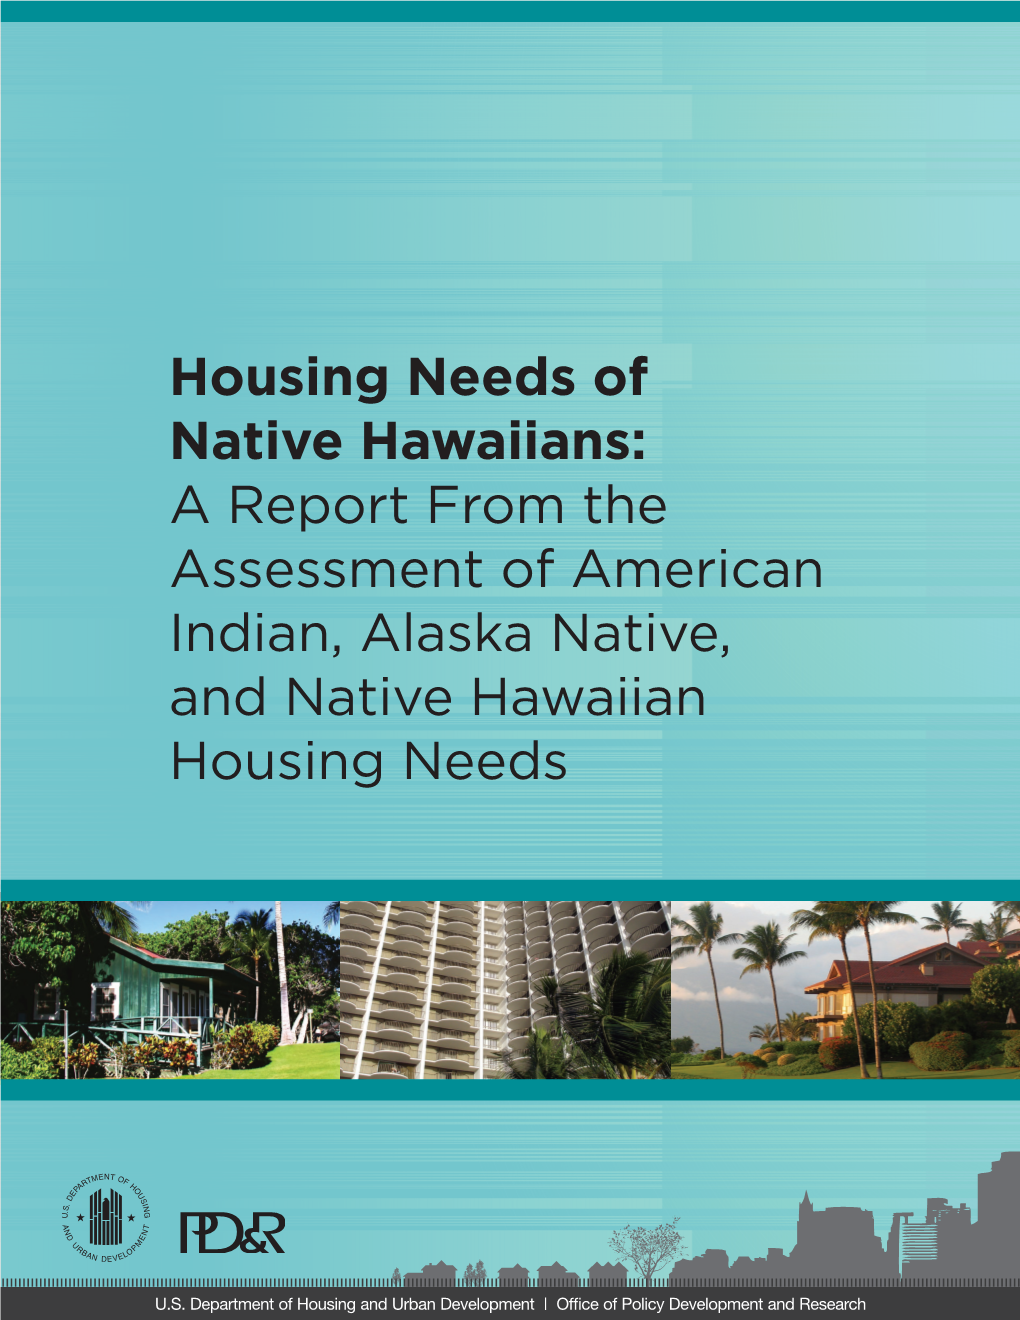 Housing Needs of Native Hawaiians: a Report from the Assessment of American Indian, Alaska Native, and Native Hawaiian Housing Needs